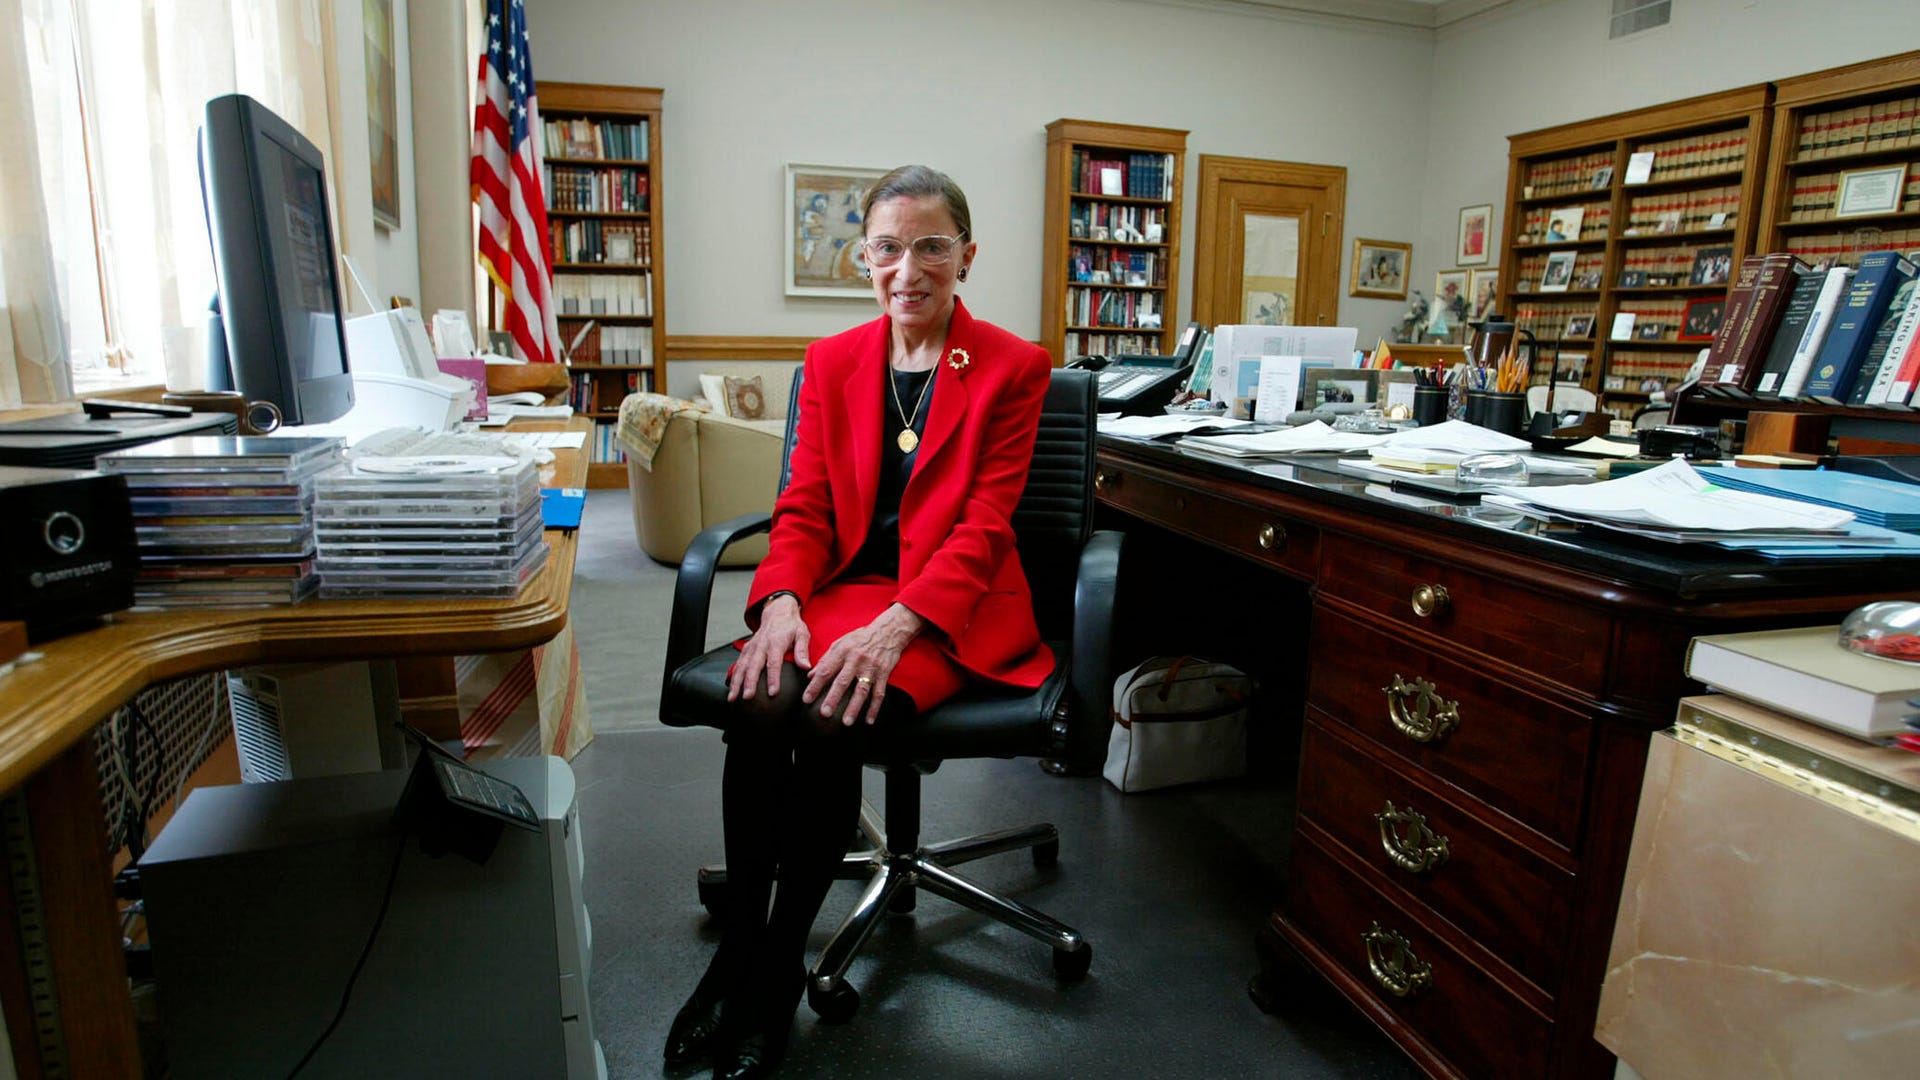 U.S. Supreme Court Justice Ruth Bader Ginsburg in 2002